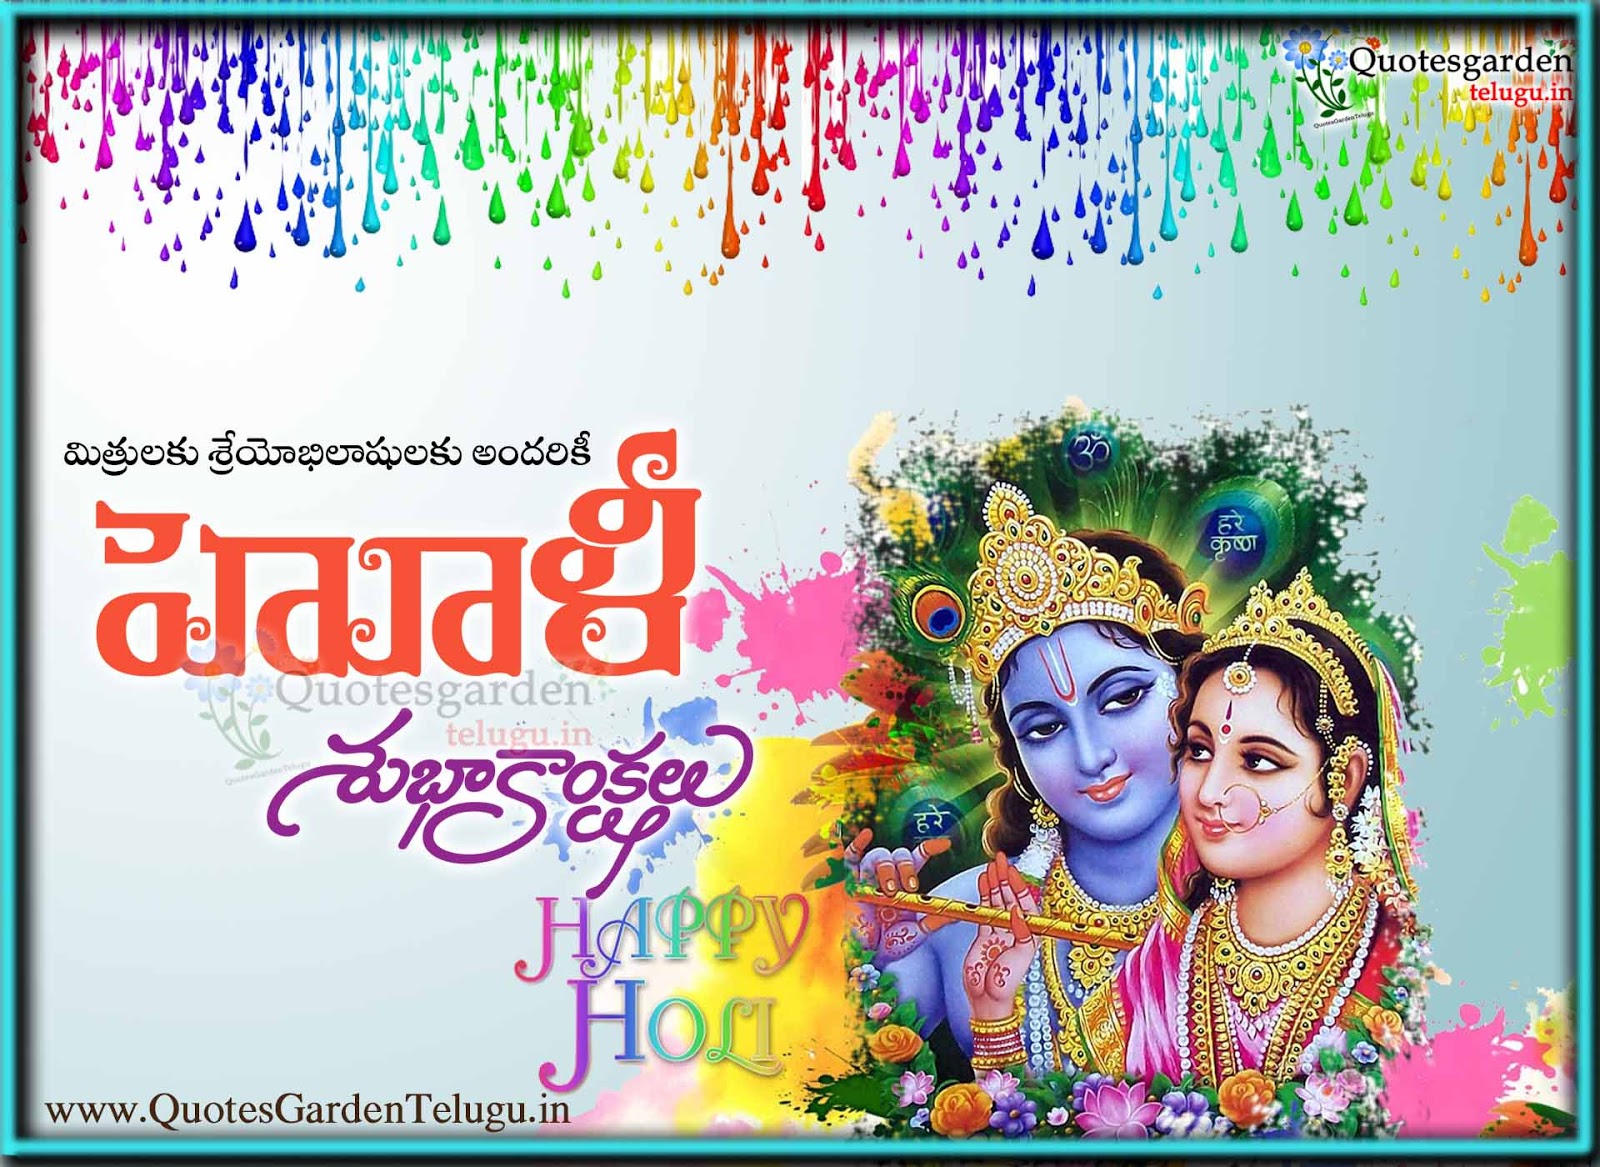 Telugu Holi 2017 Greetings quotes wishes messages | QUOTES GARDEN